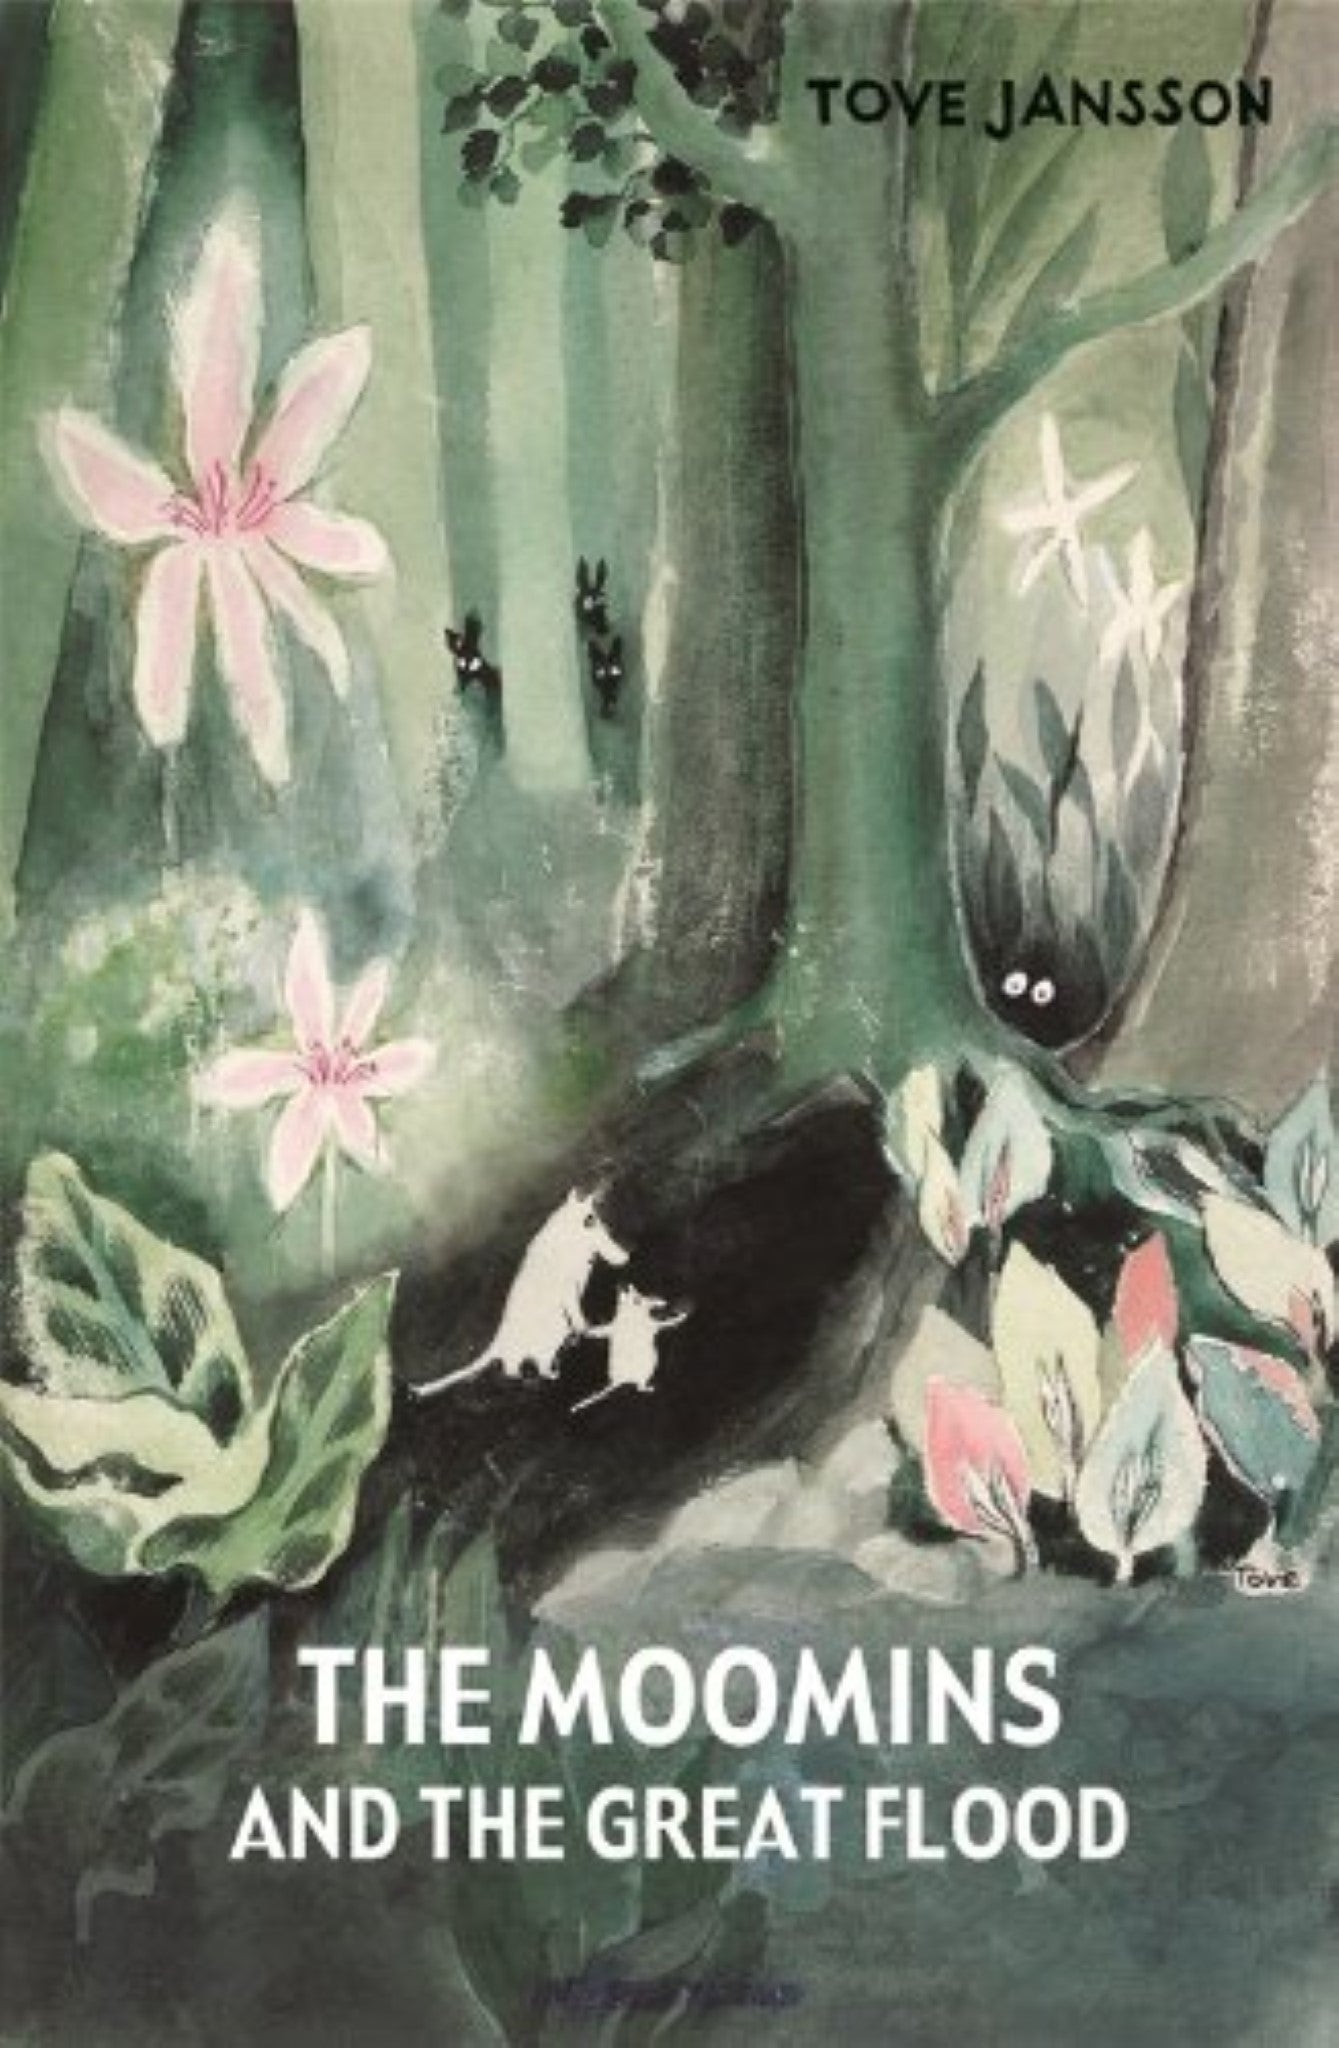 Moomin and the Great Flood - Tove Jansson